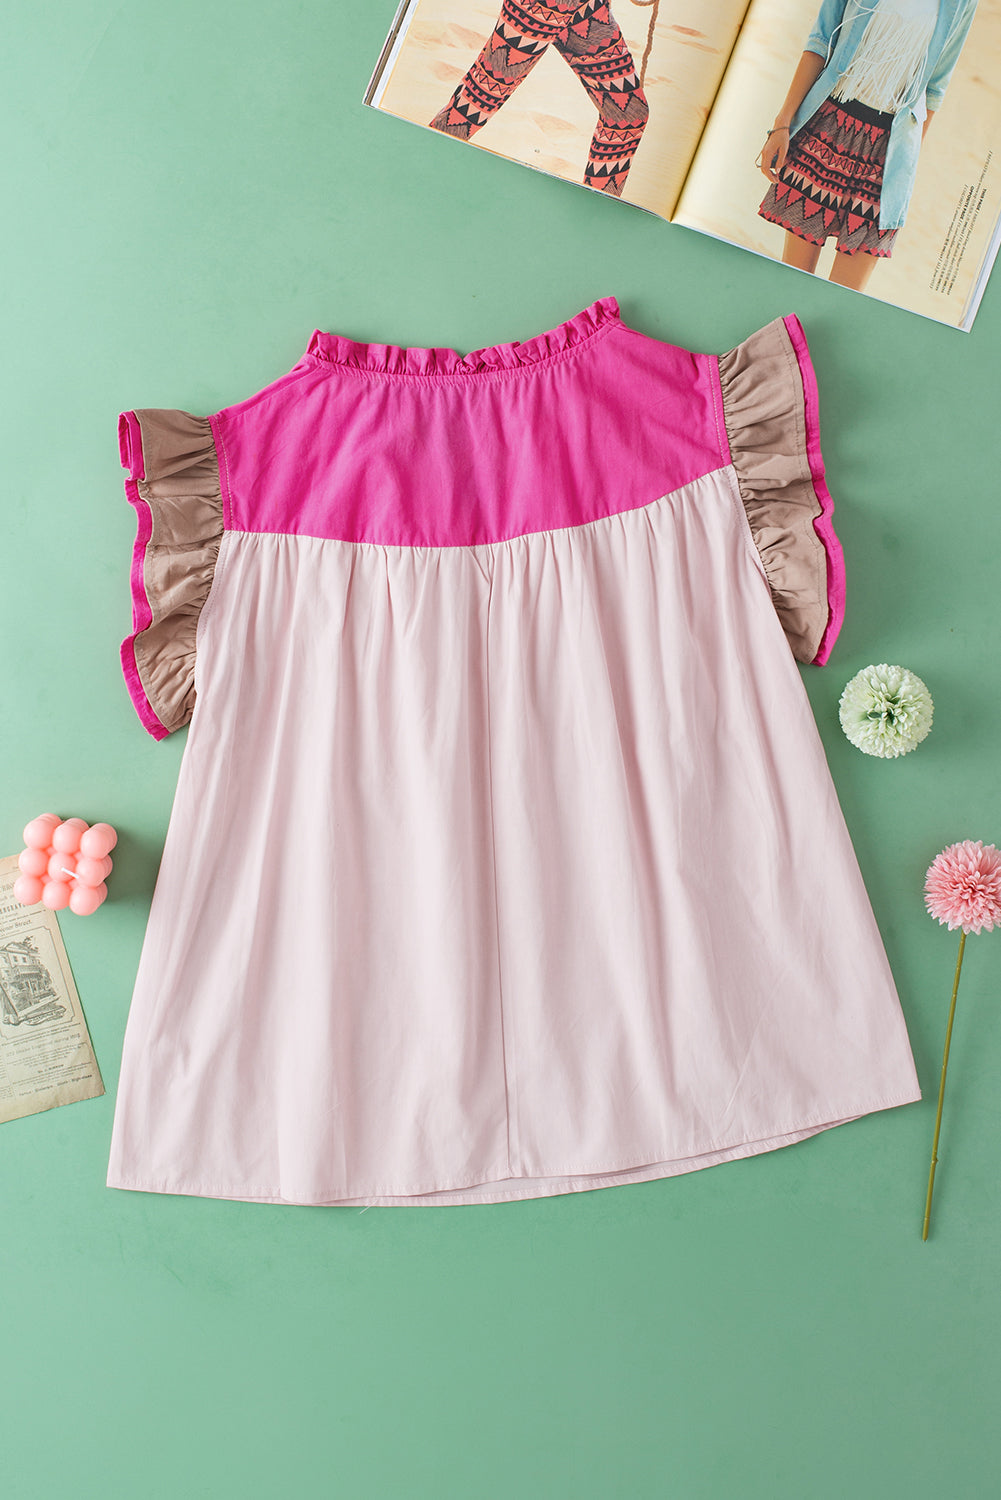 Ruffled Color Block Notched Cap Sleeve Blouse